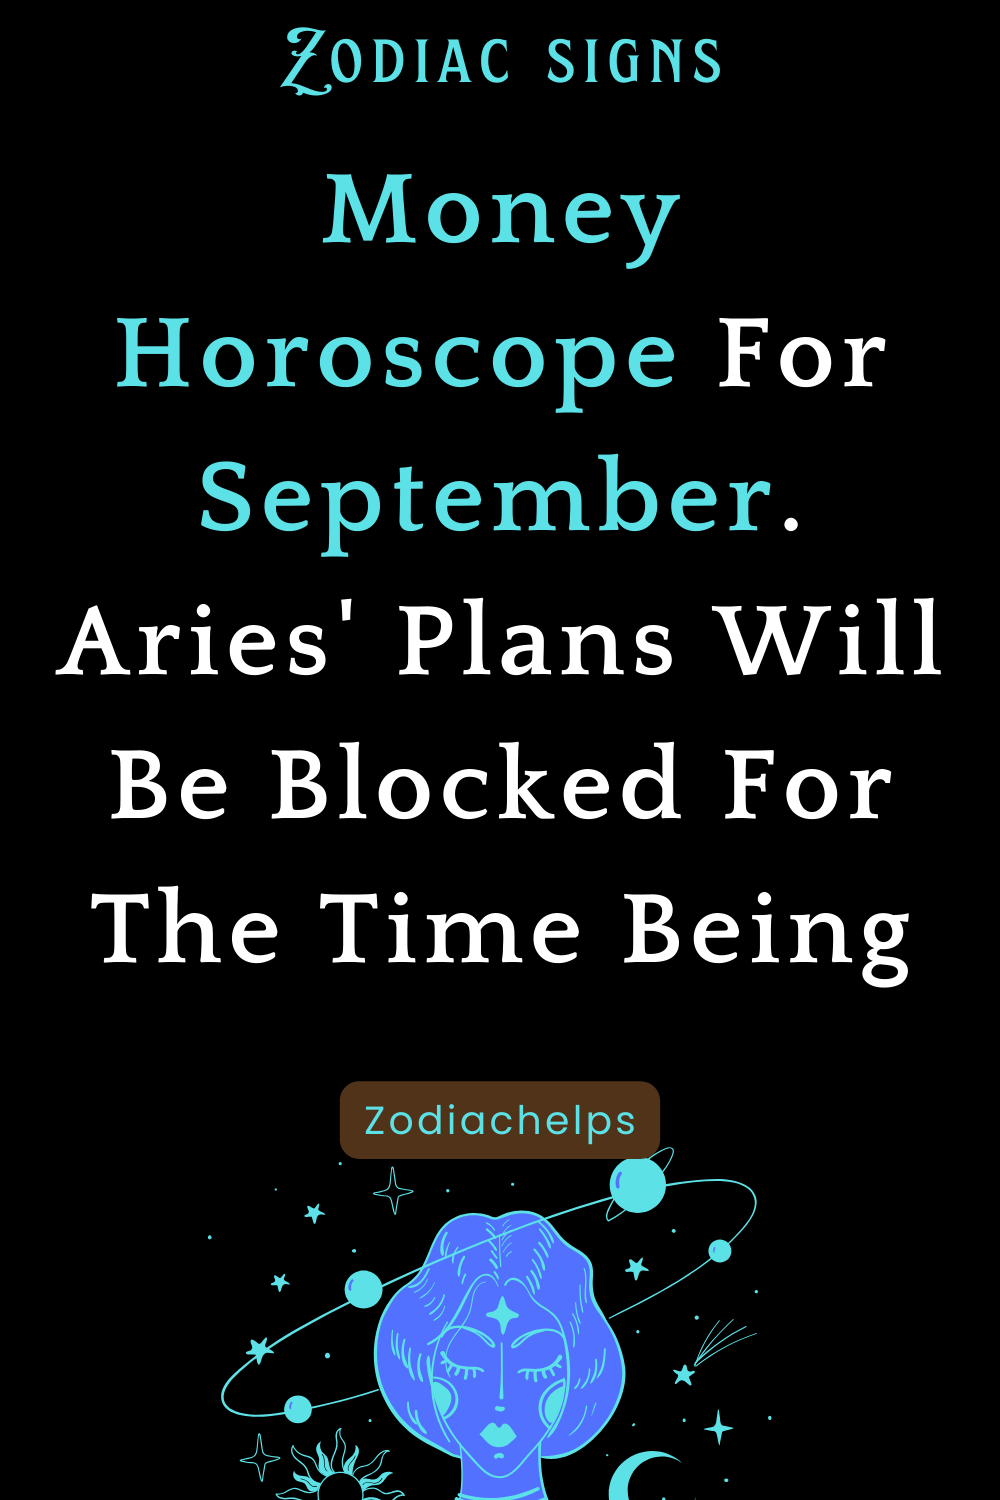 Money Horoscope For September. Aries' Plans Will Be Blocked For The Time Being